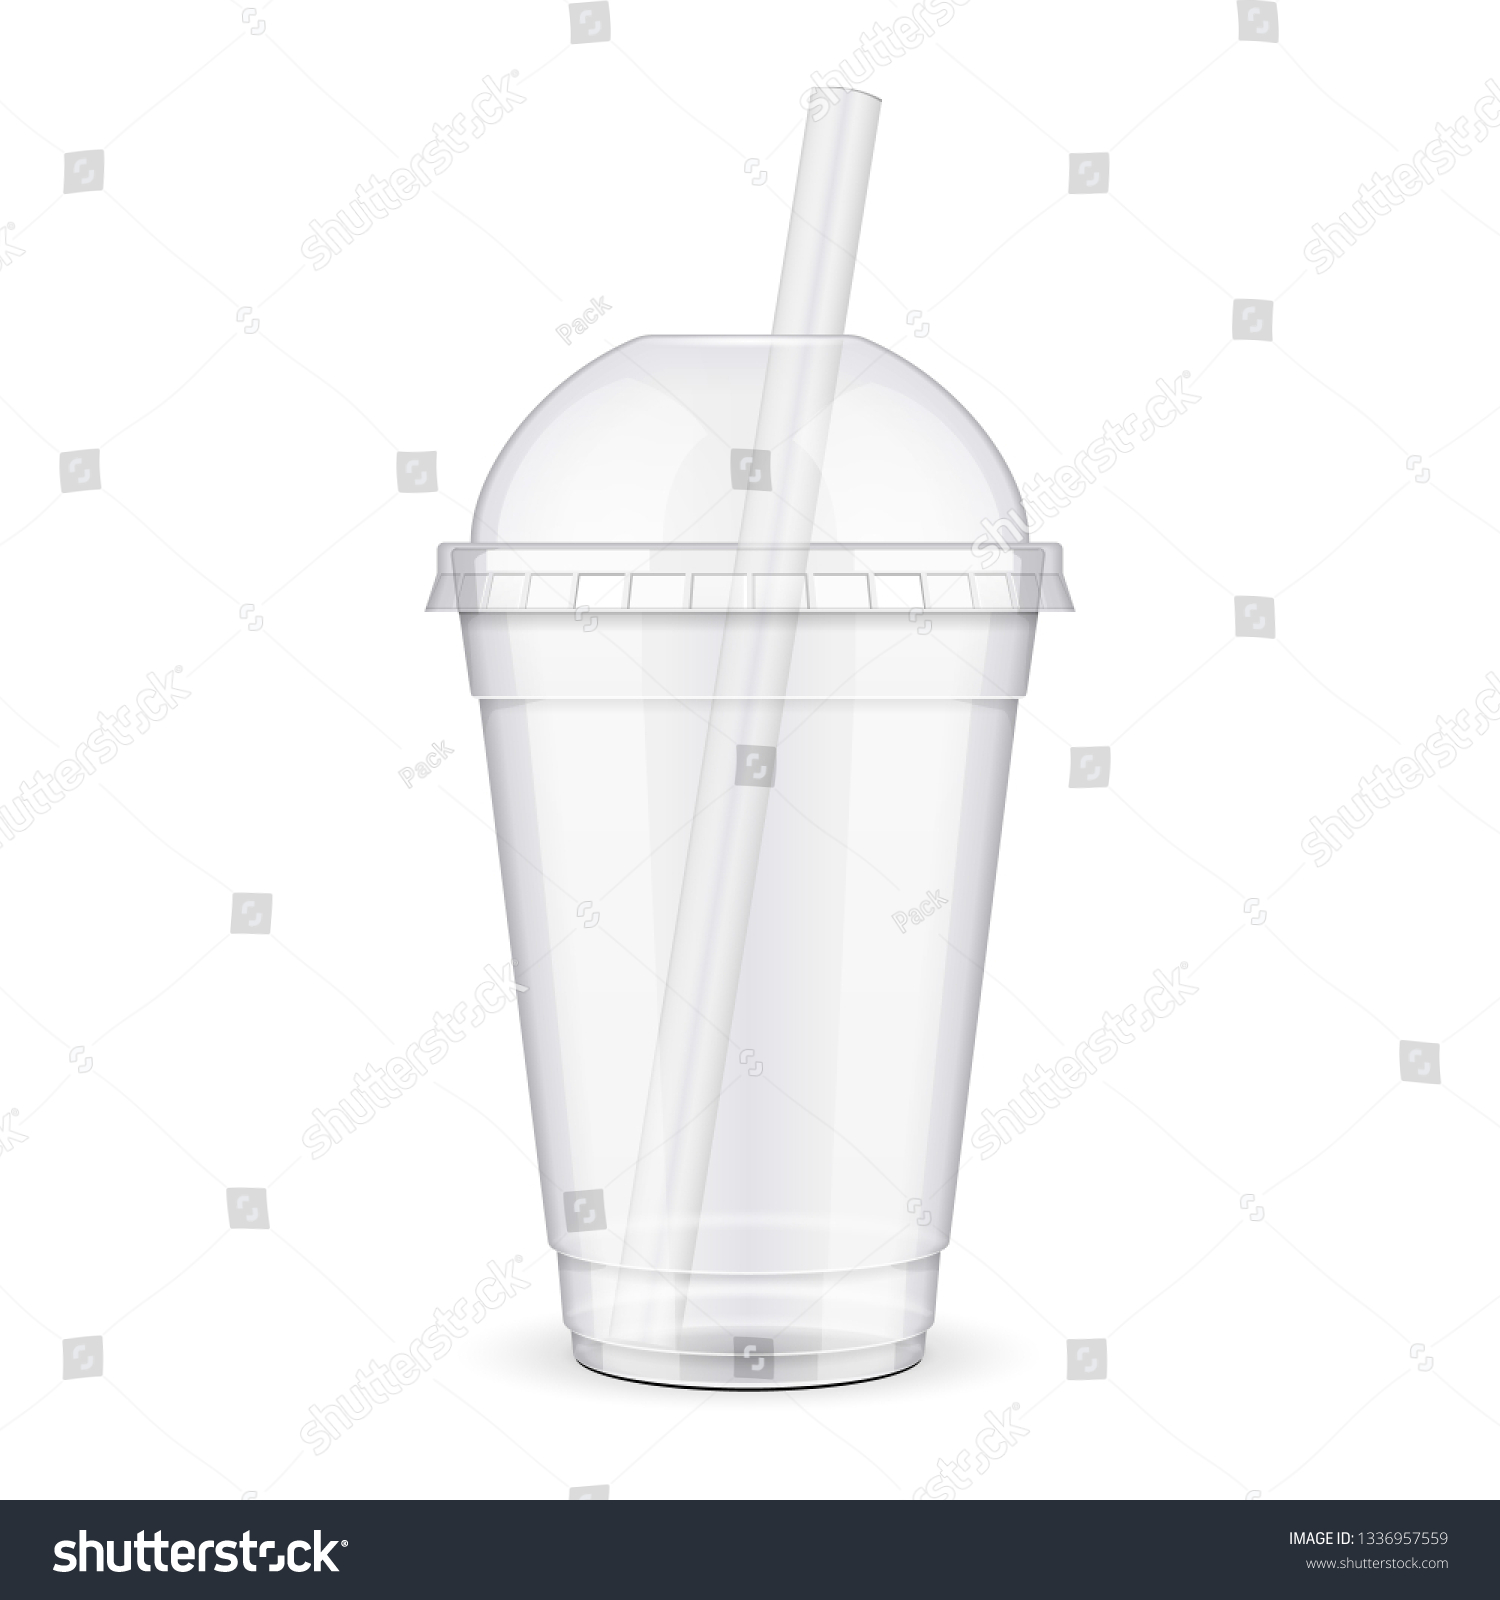 SVG of Empty Disposable Plastic Paper Carton Cup With Lid And Straw. Transparent Container For Cold, Hot Drink. Juice Fresh, Coffee, Tea, Milkshake. Illustration Isolated On White Background Mock Up Template svg